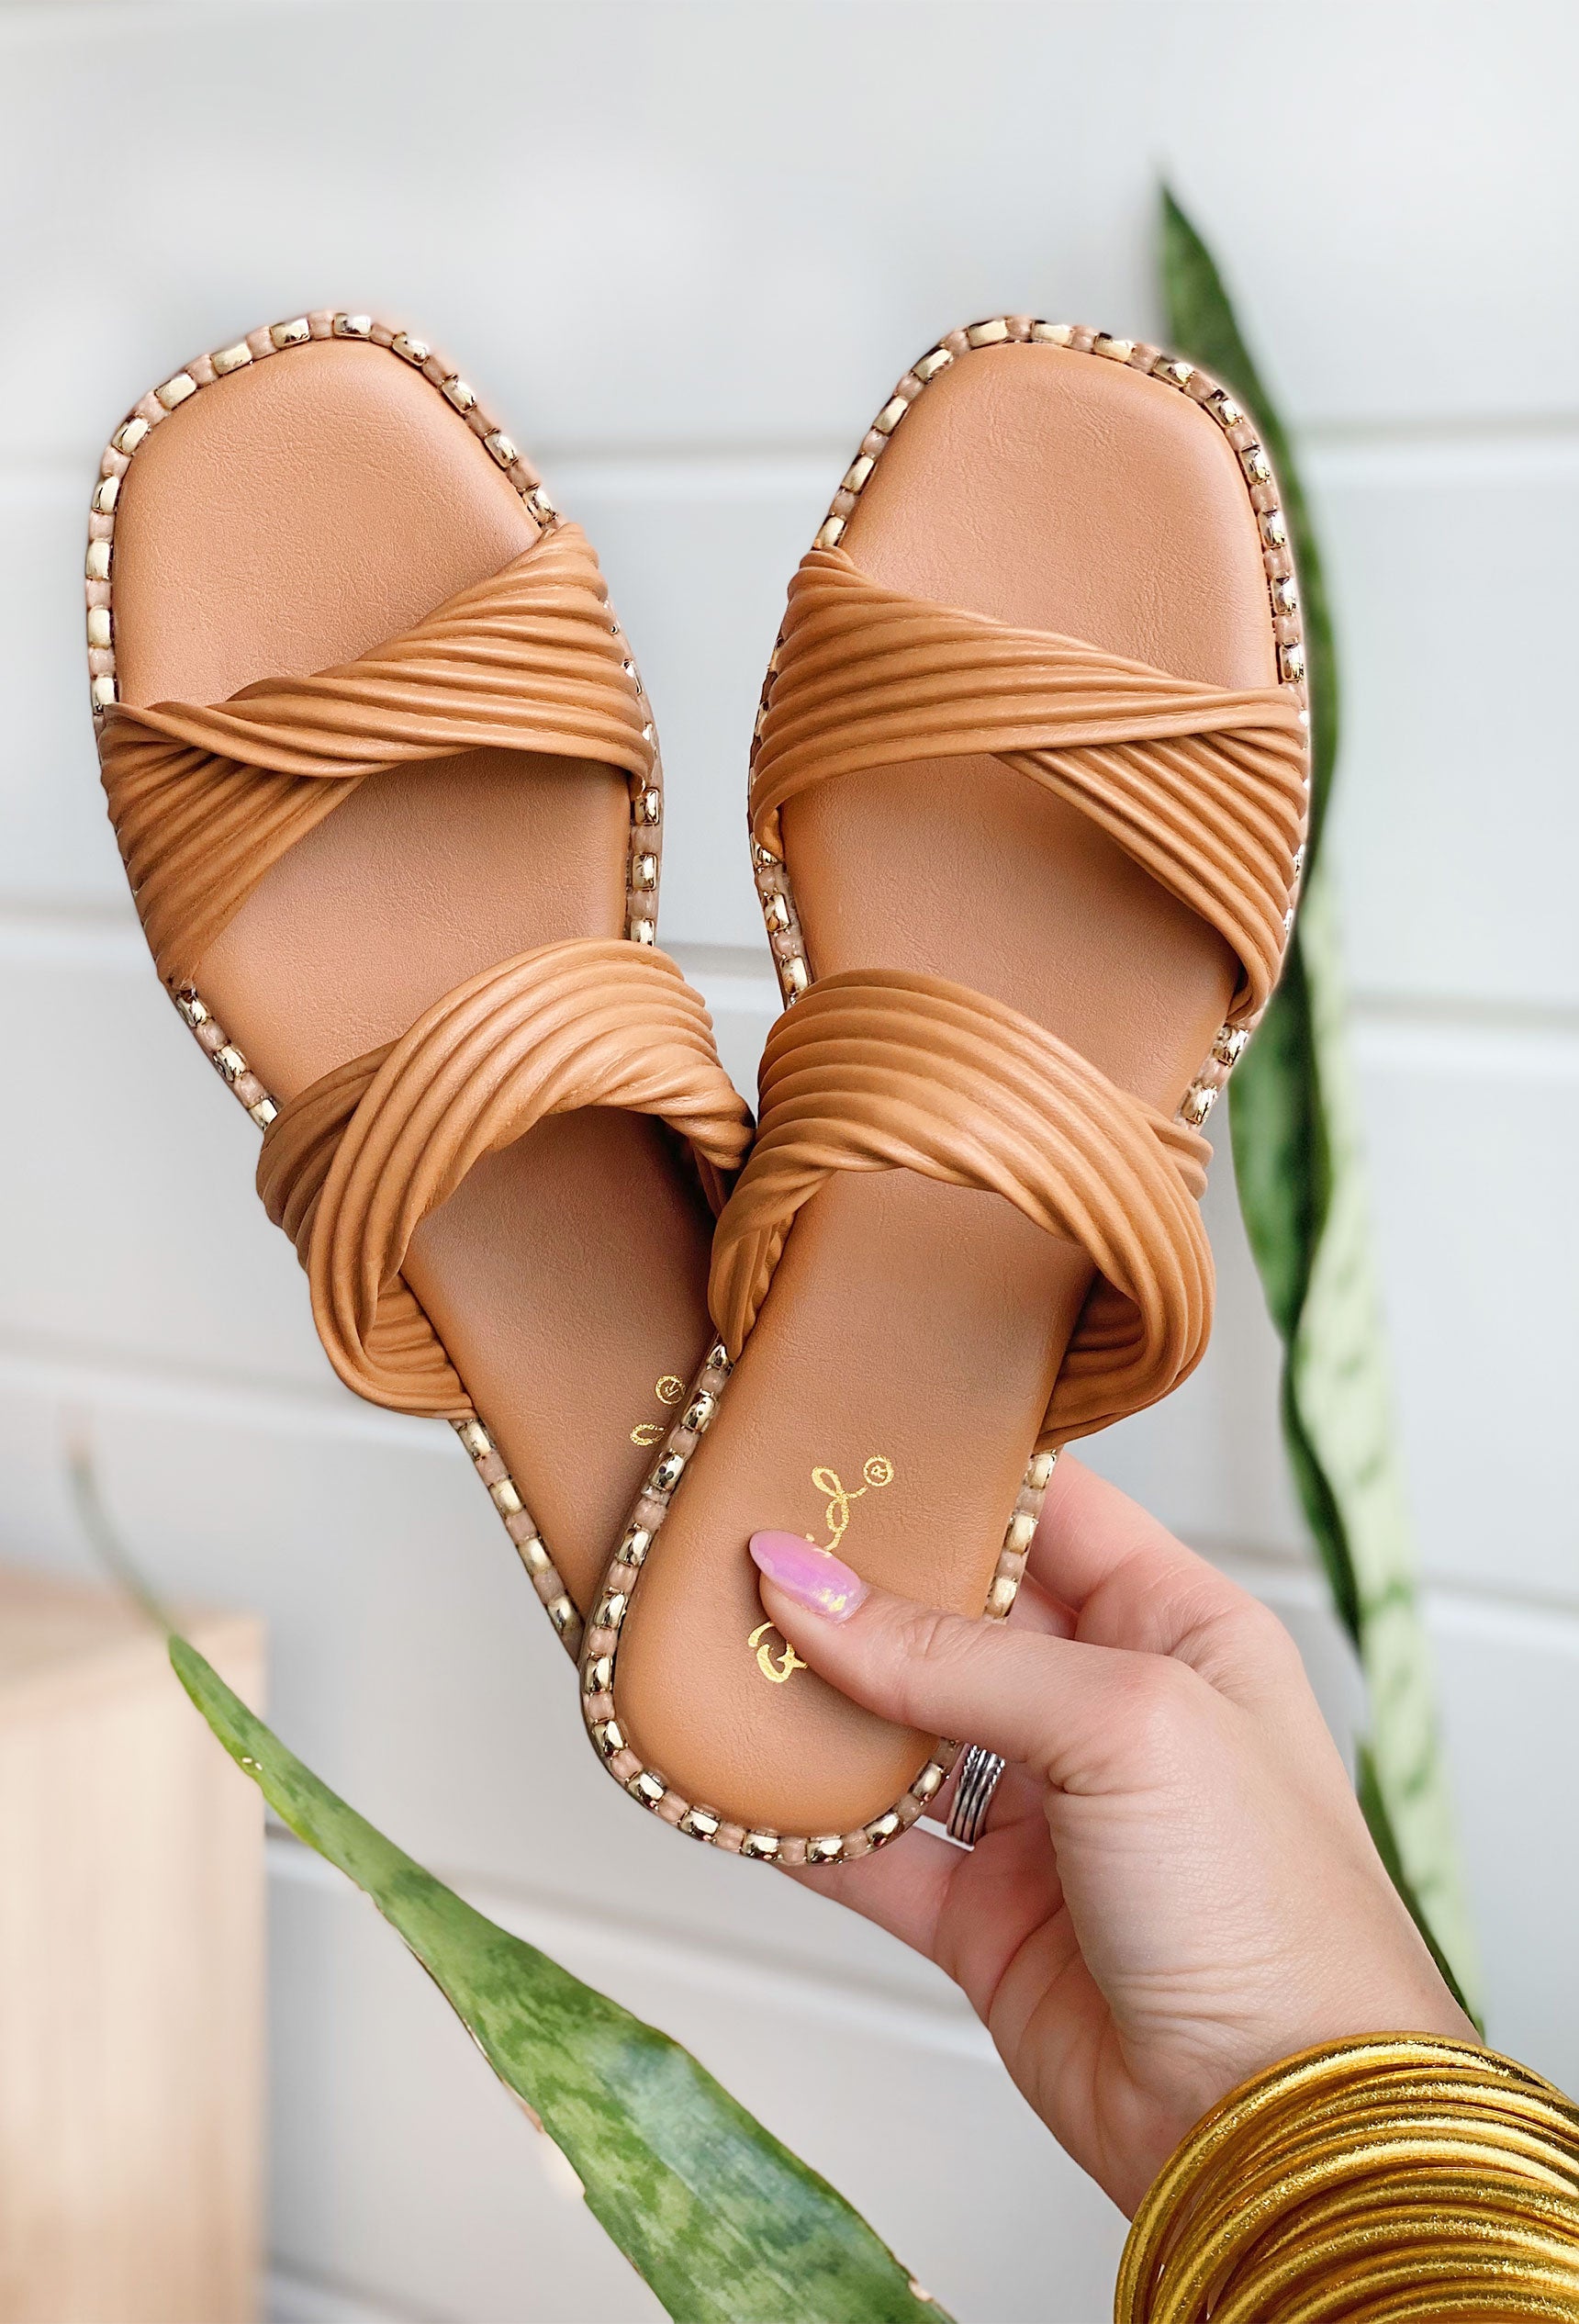 Indigo Camel Sandals. Sandals with double camel bands and gold detailing around the edge.